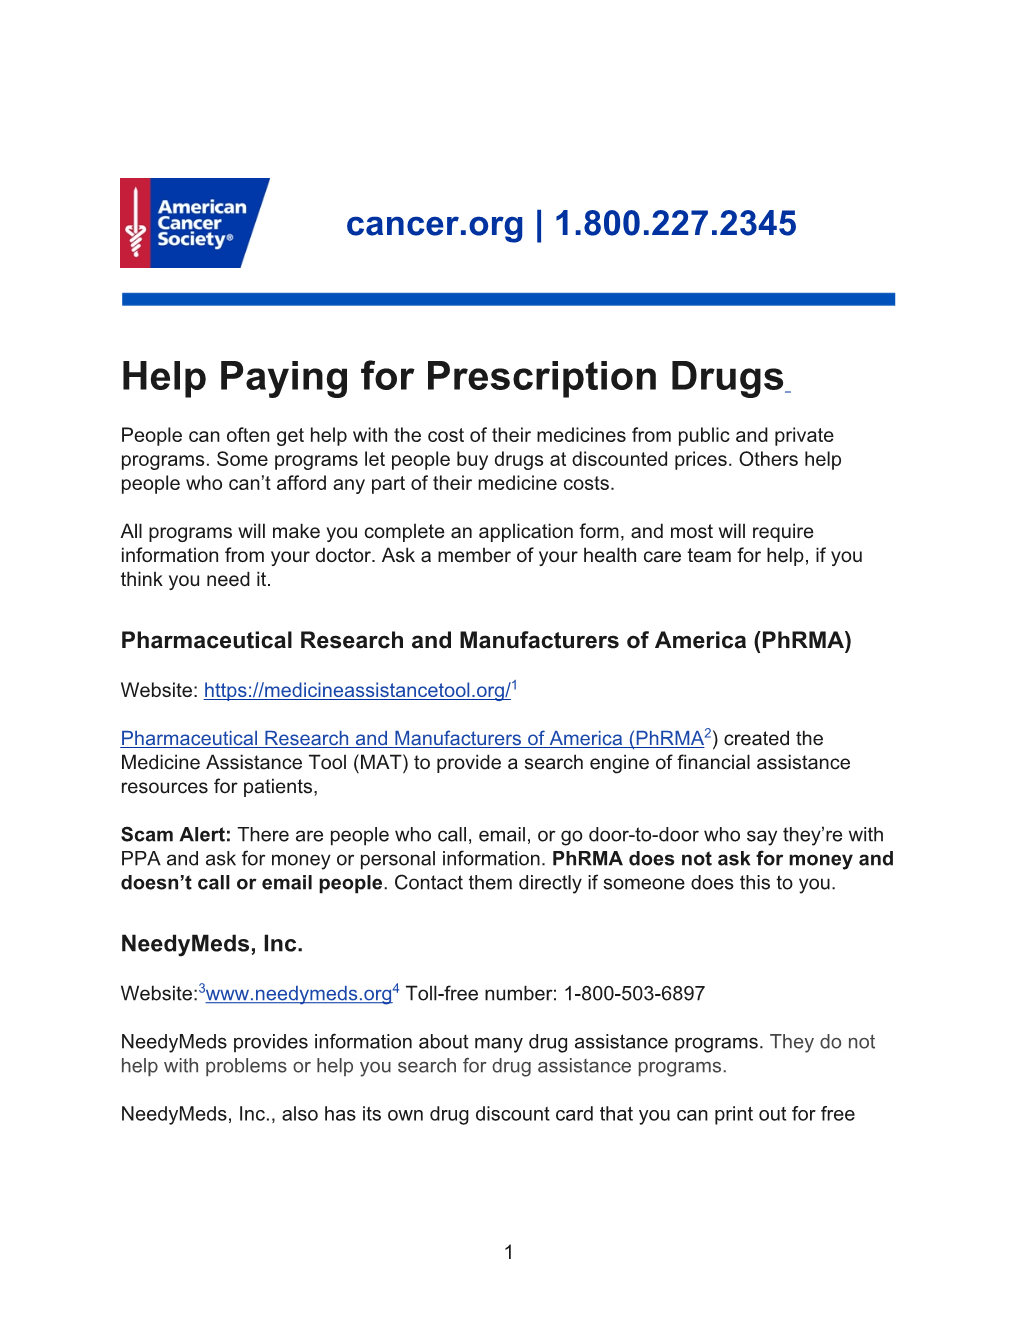 Help Paying for Prescription Drugs